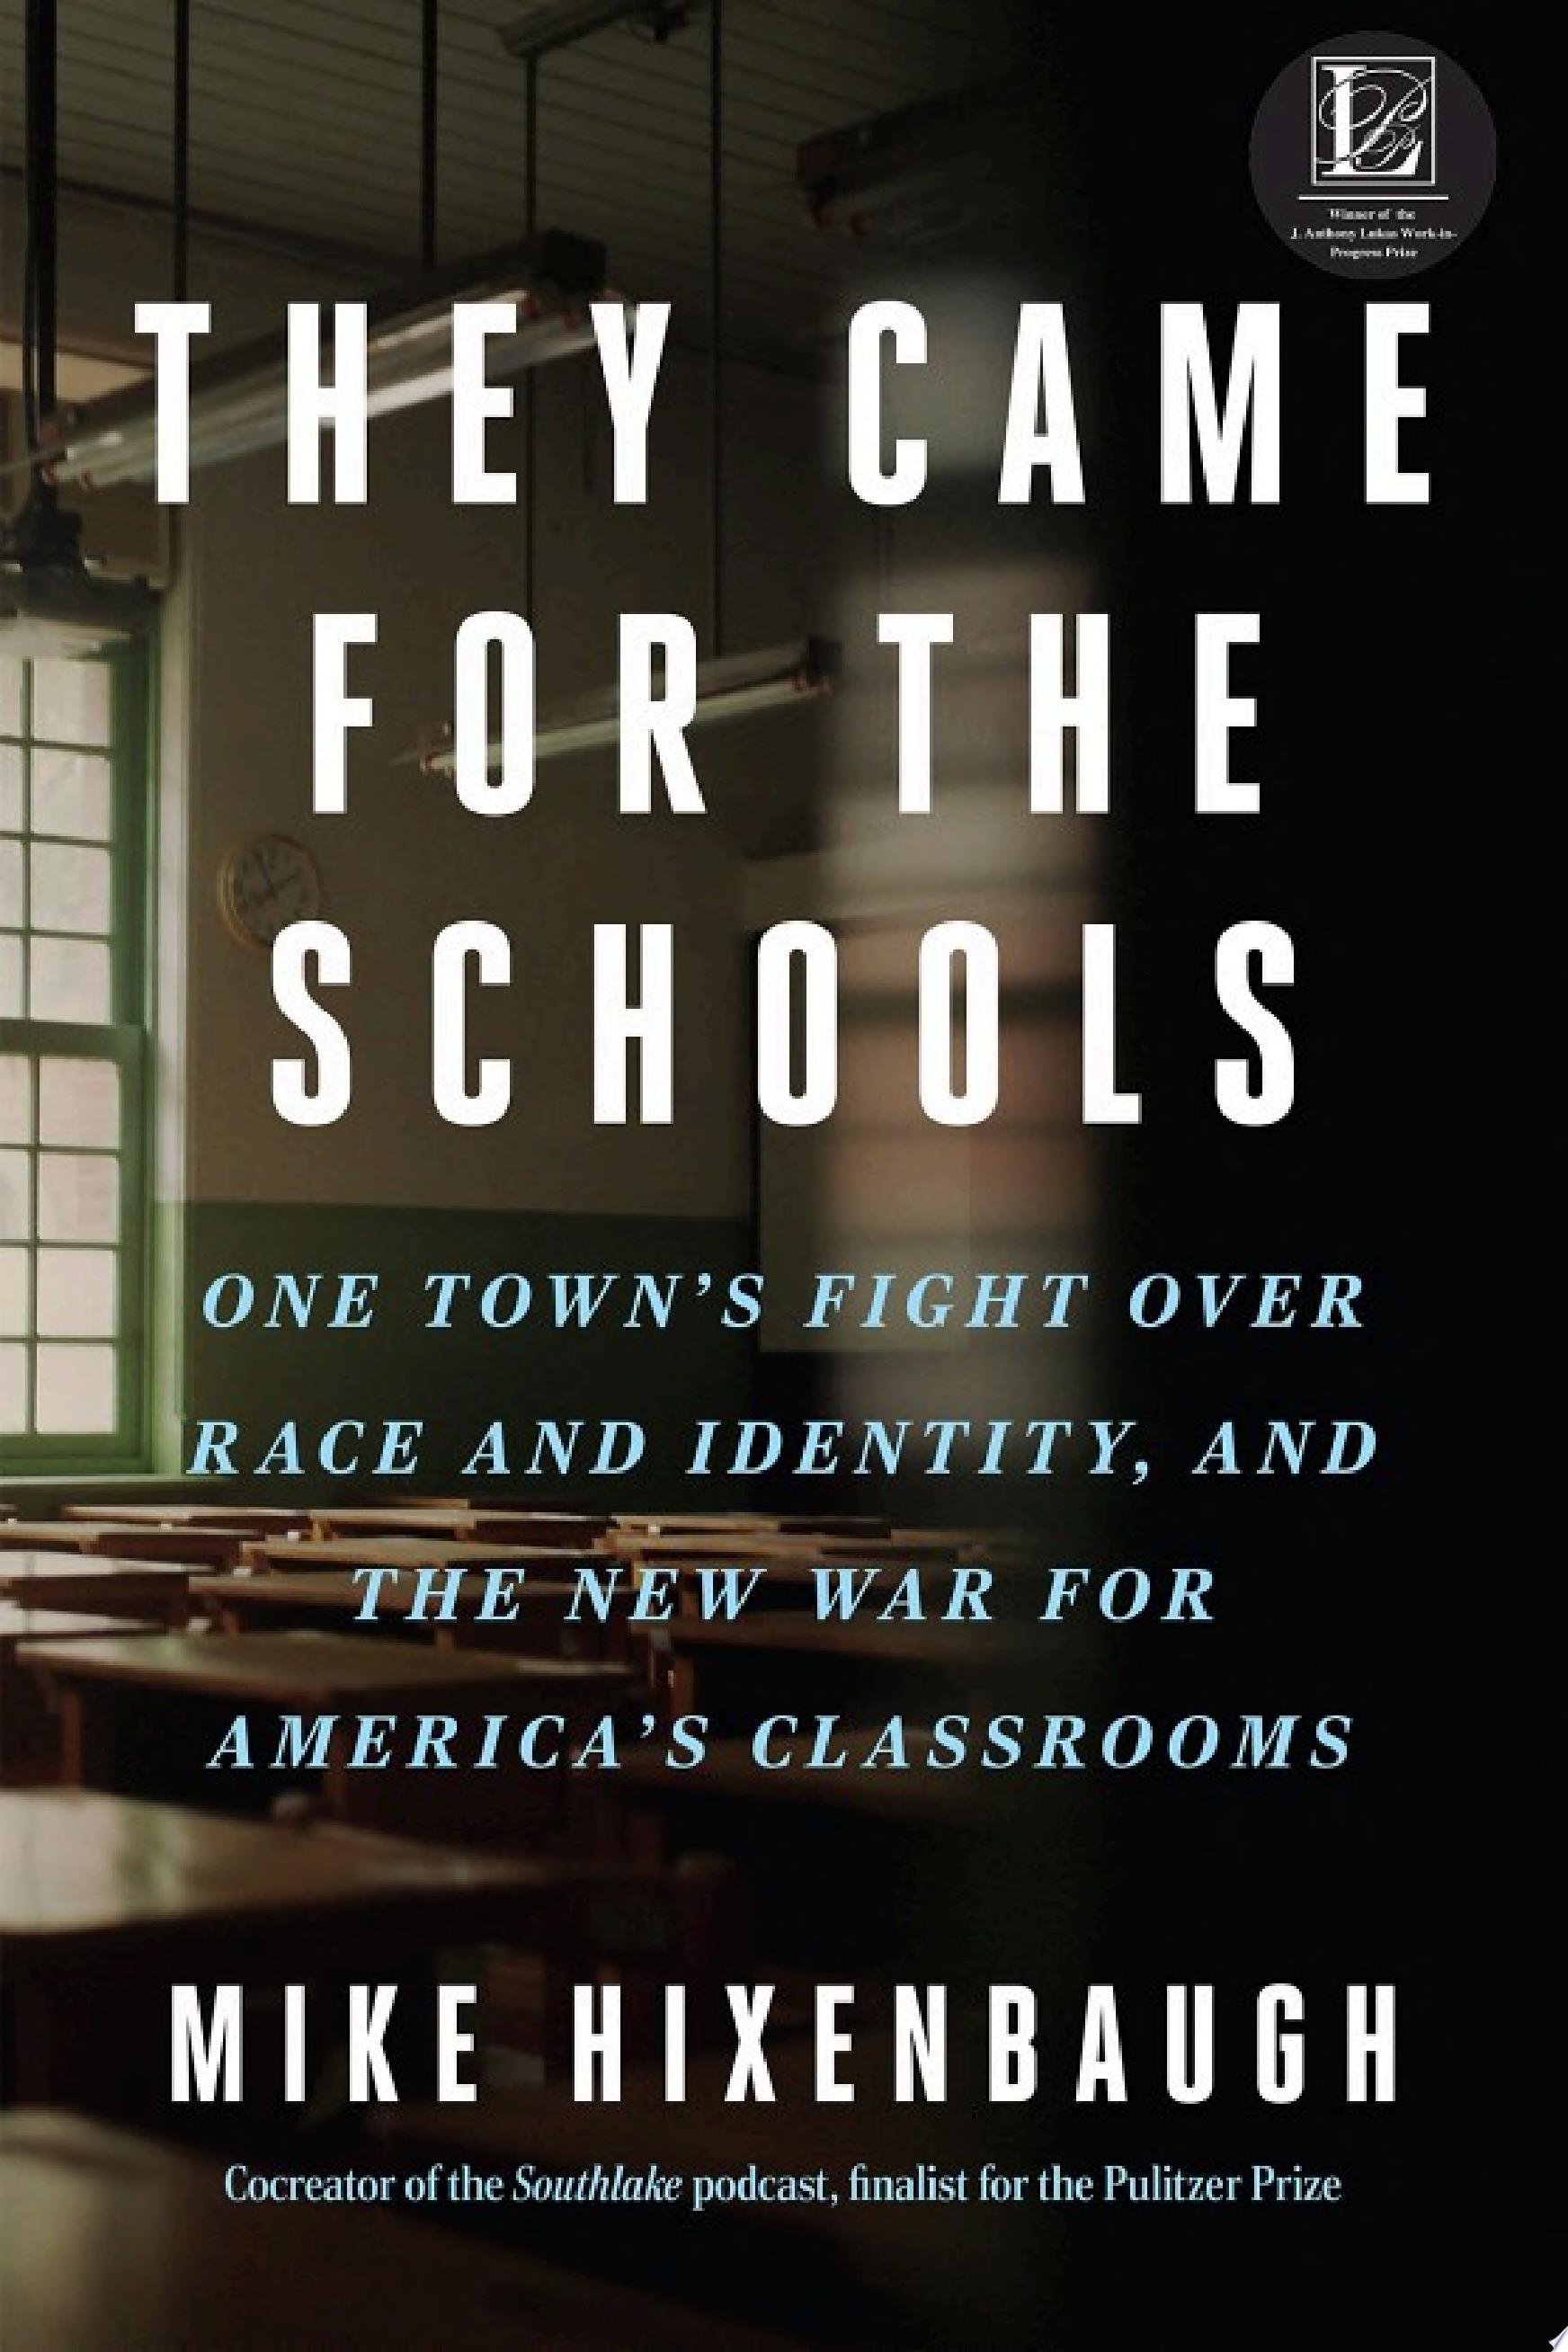 Image for "They Came for the Schools"